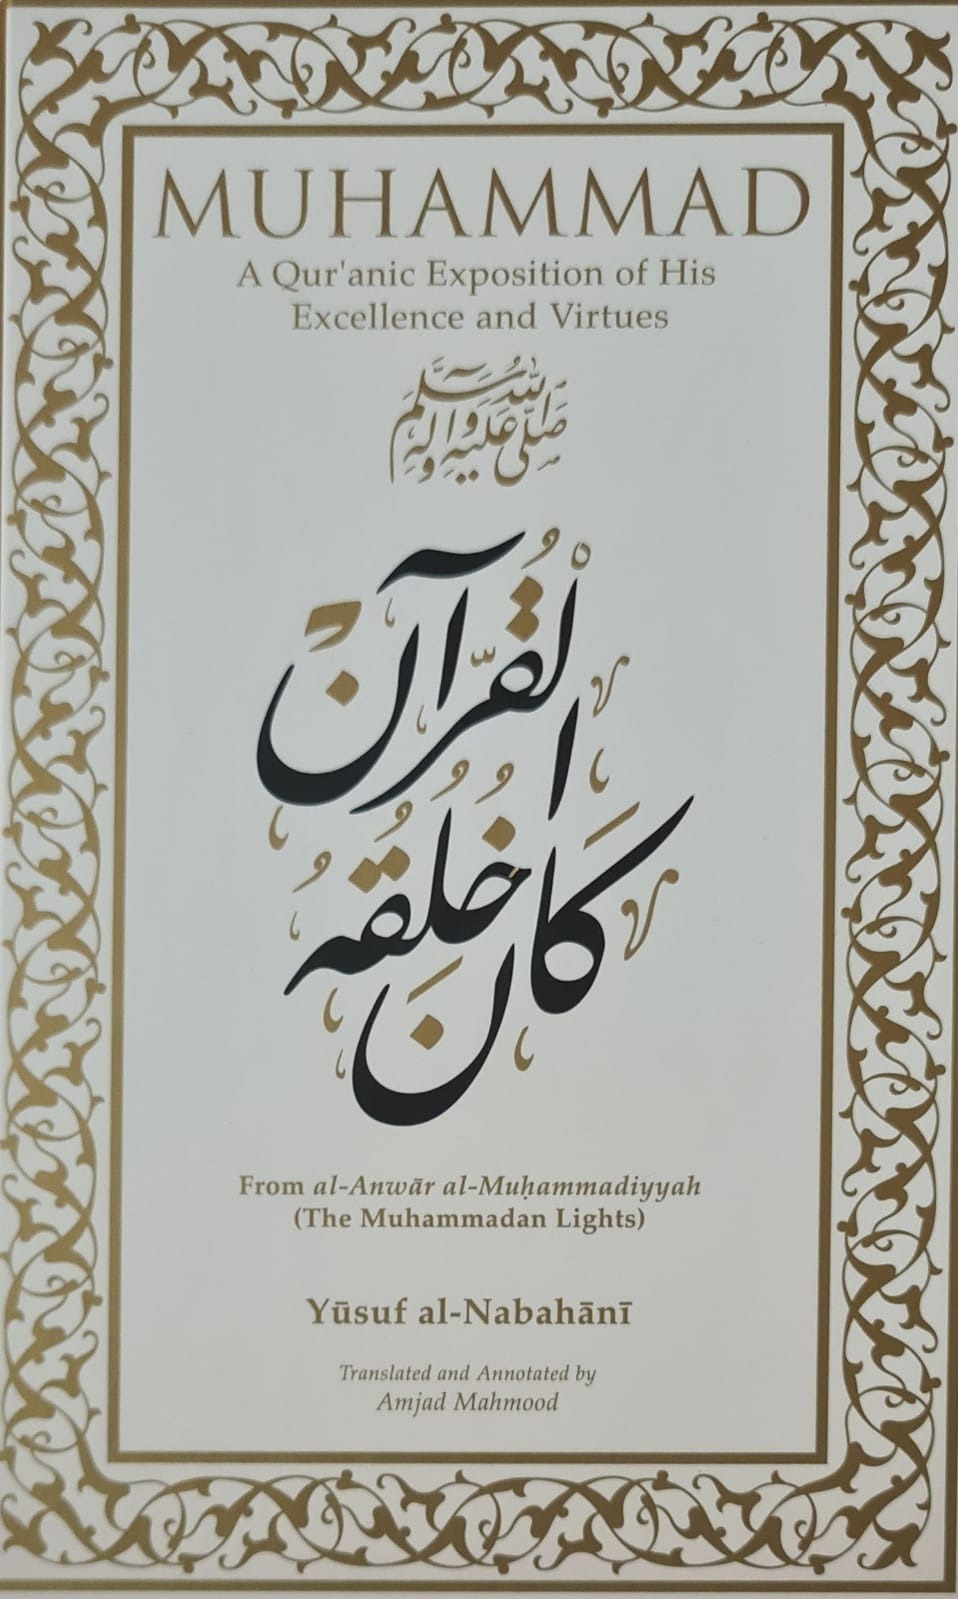 Muhammad A Quranic Exposition of his Excellence and Virtues